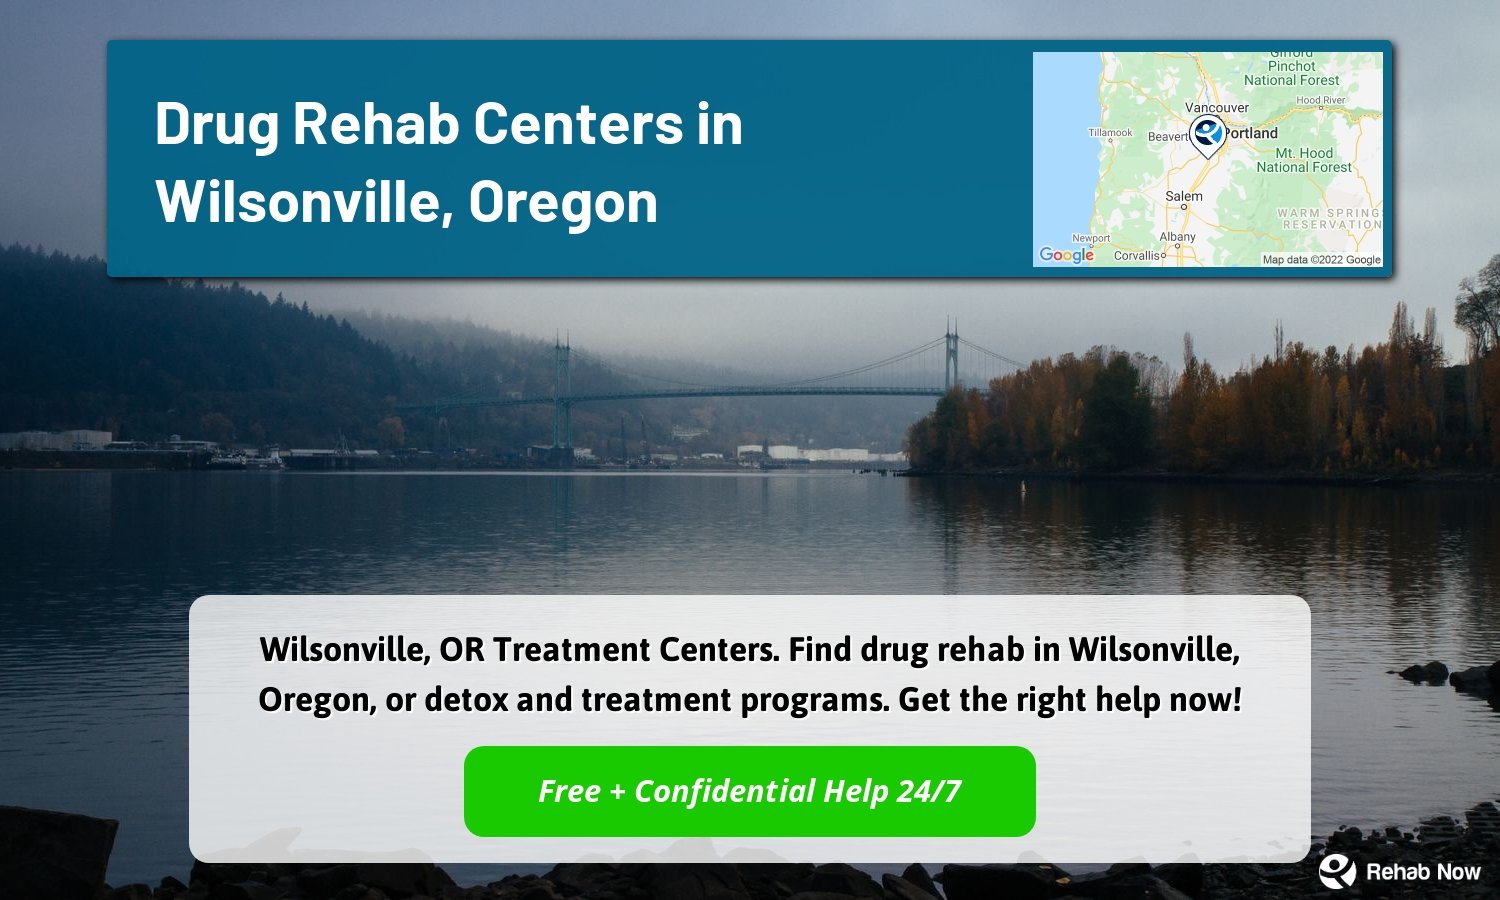 Wilsonville, OR Treatment Centers. Find drug rehab in Wilsonville, Oregon, or detox and treatment programs. Get the right help now!